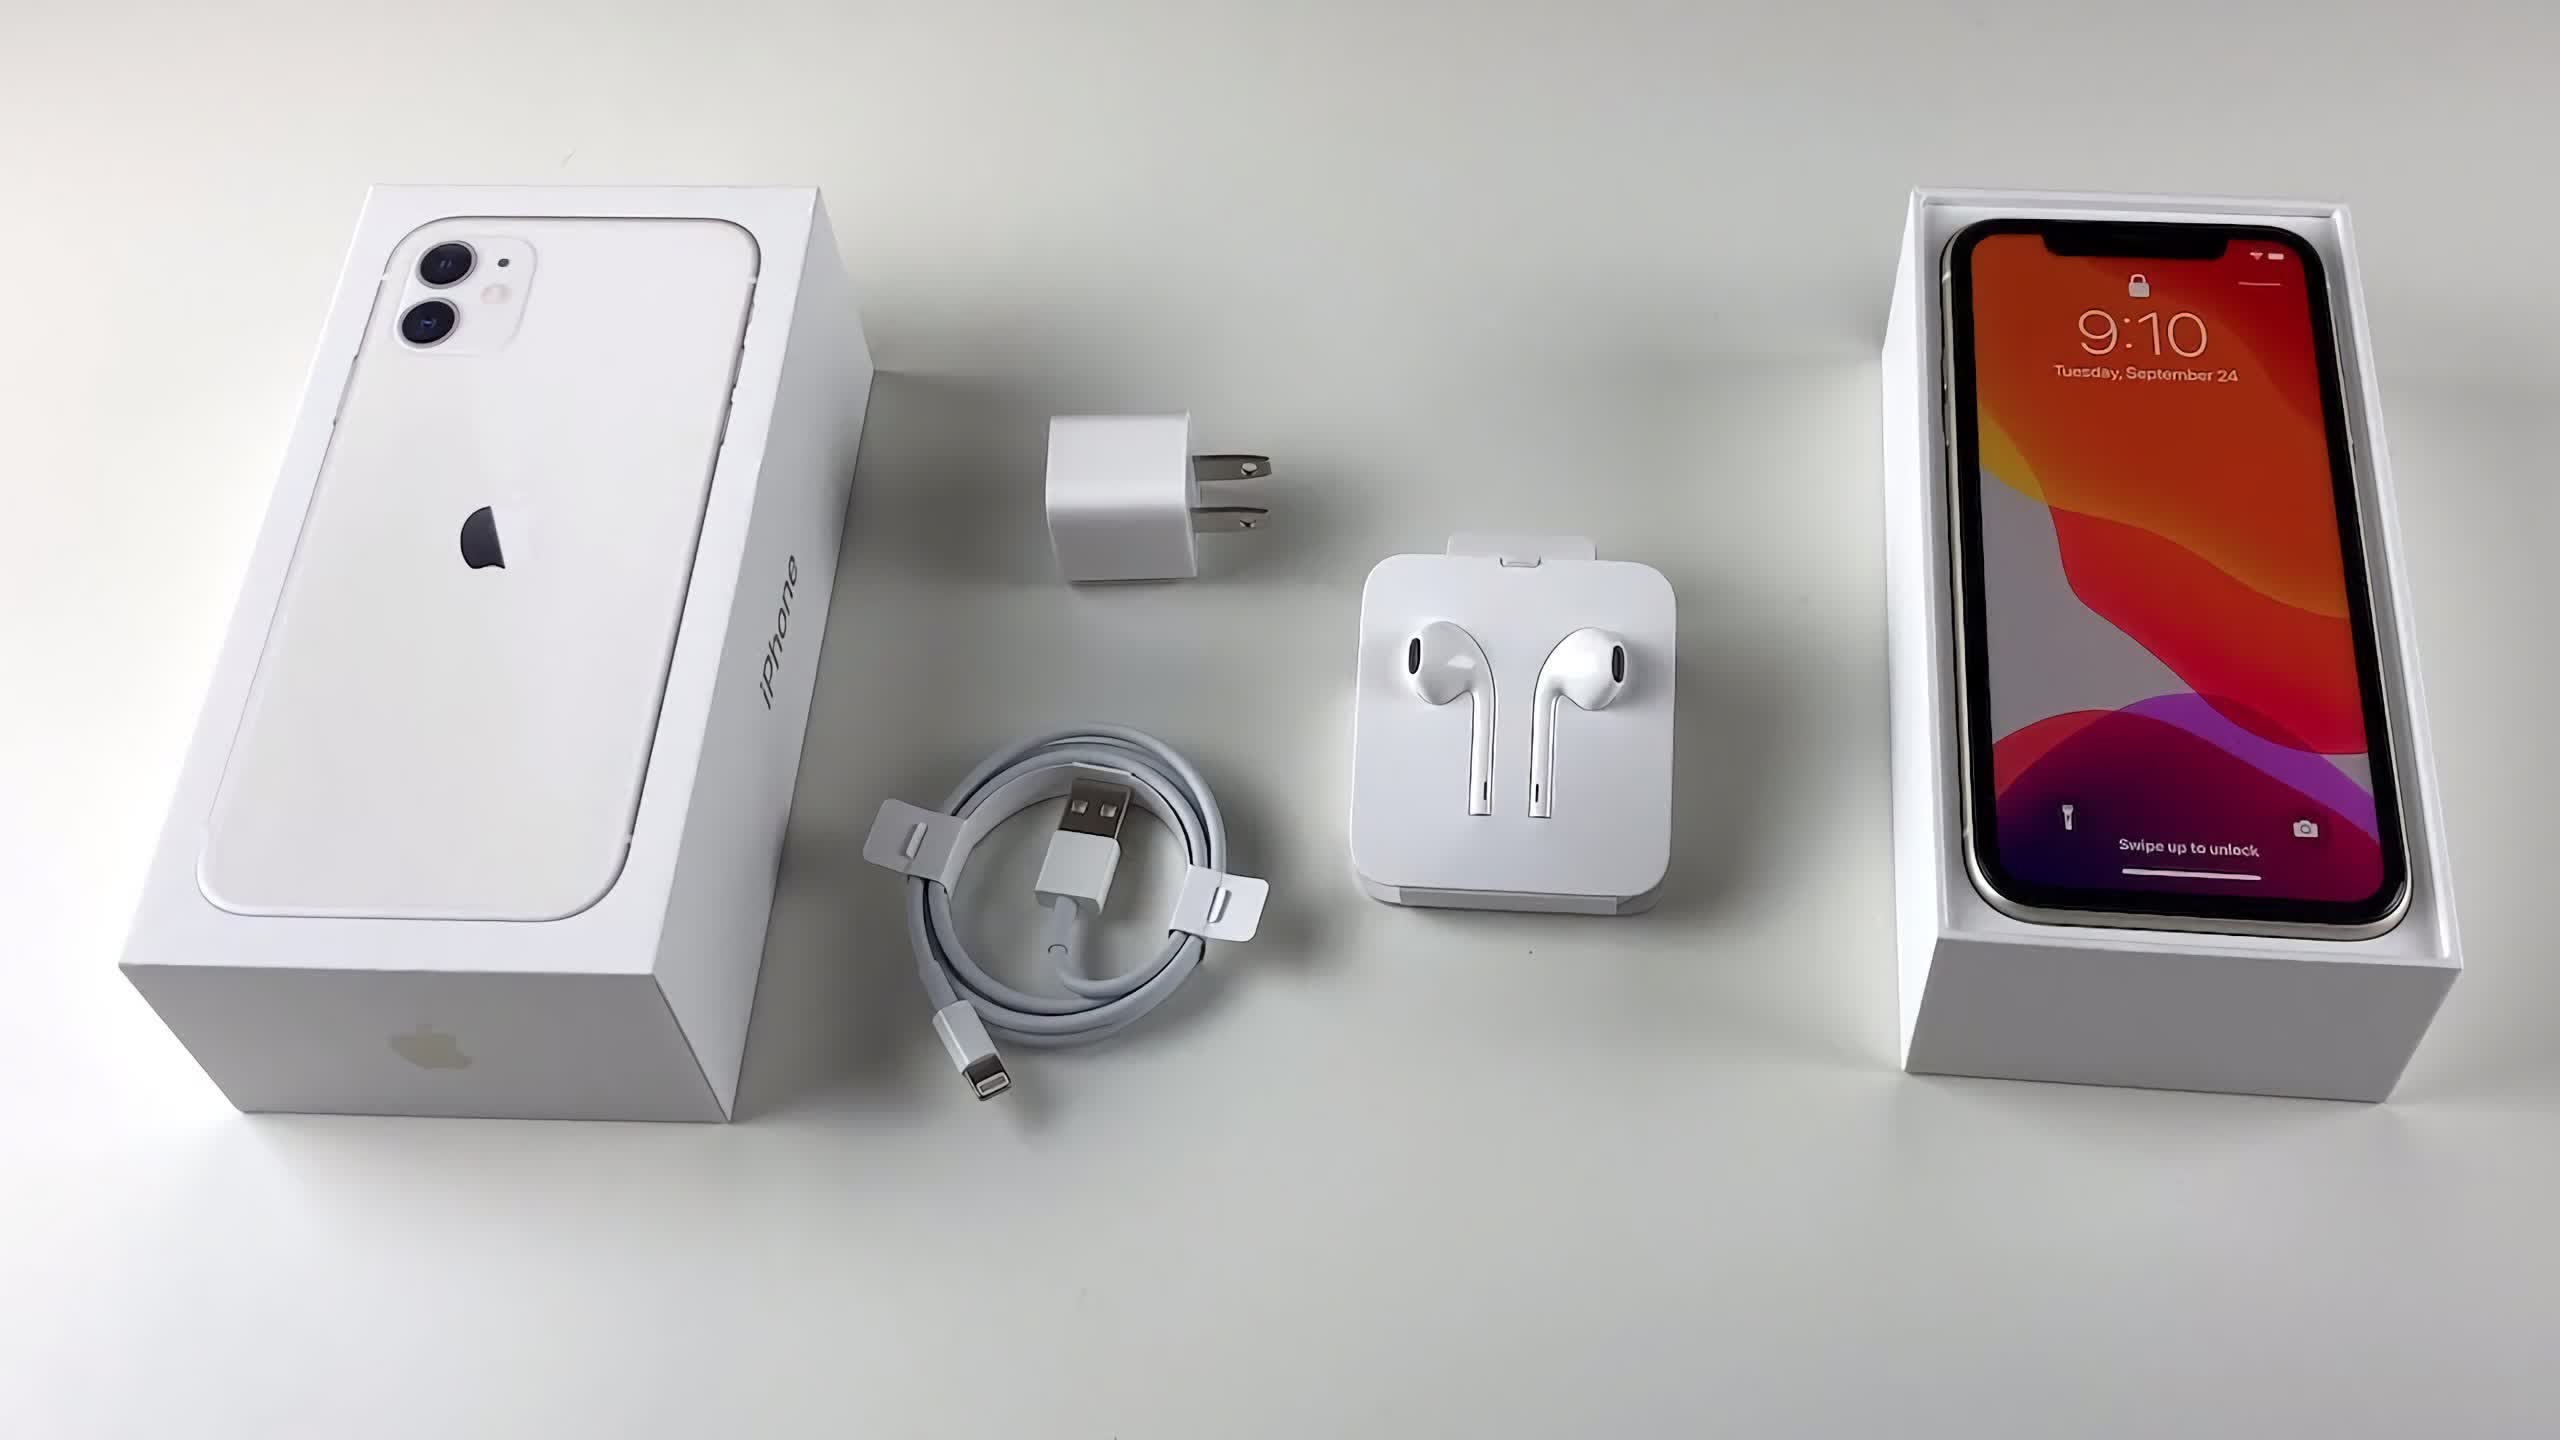 Students are suing Apple for deciding not to ship a wall charger with the iPhone 12